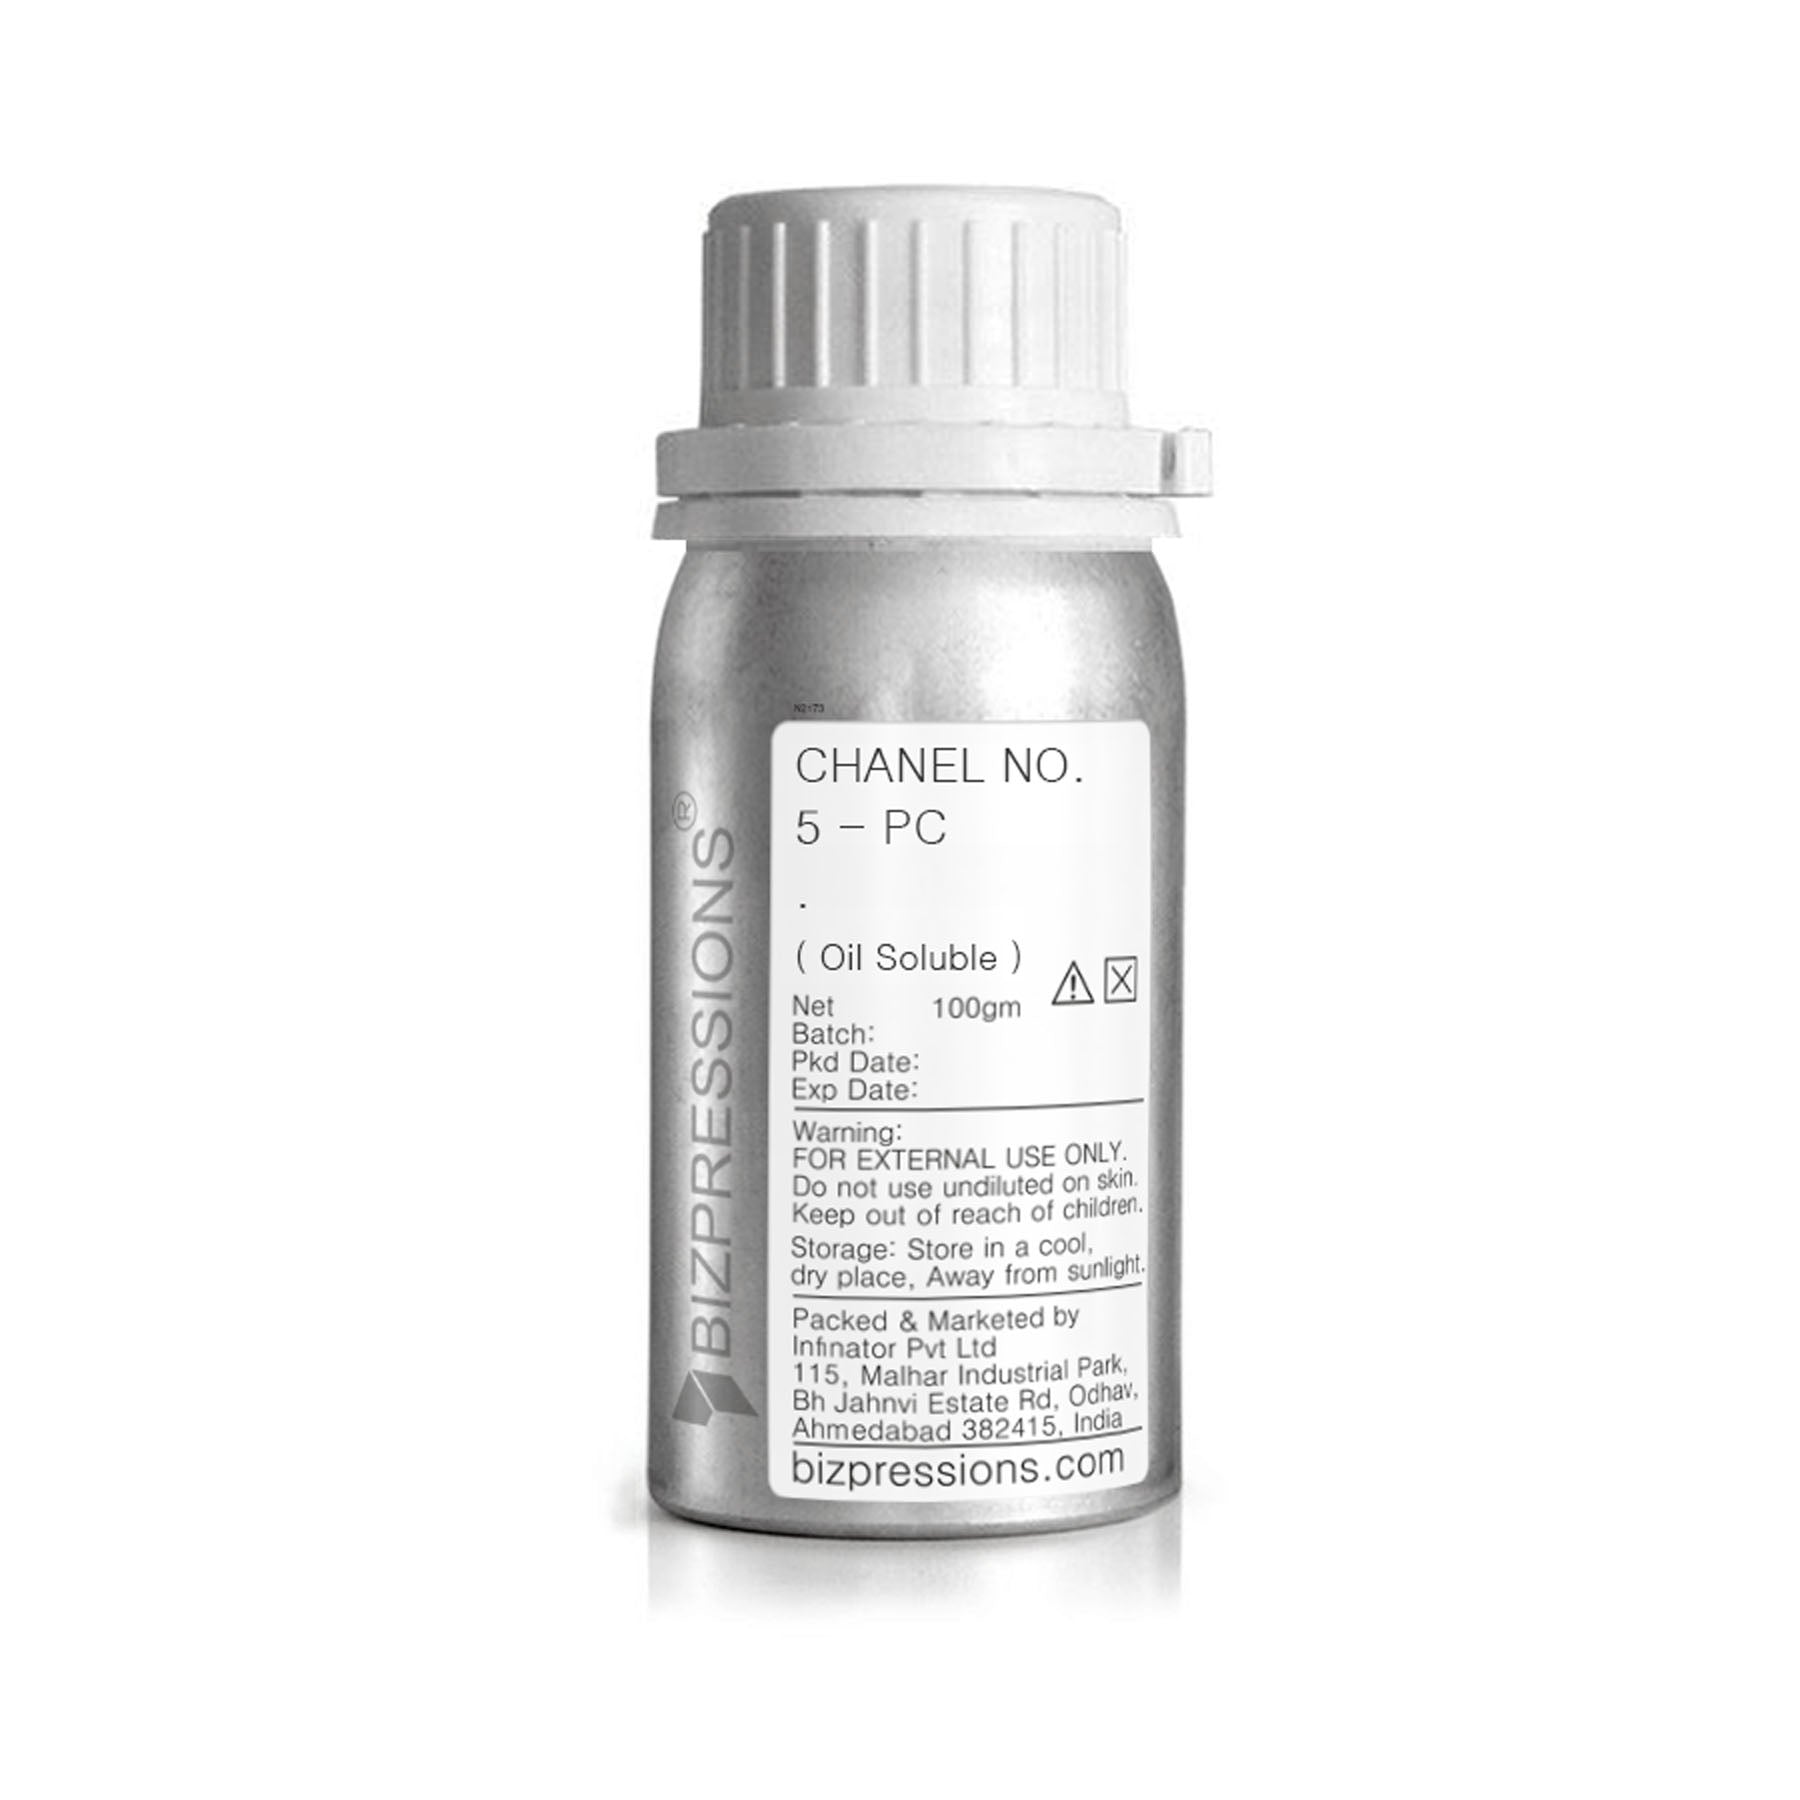 CHANEL NO. 5 - PC - Fragrance ( Oil Soluble ) - 100 gm